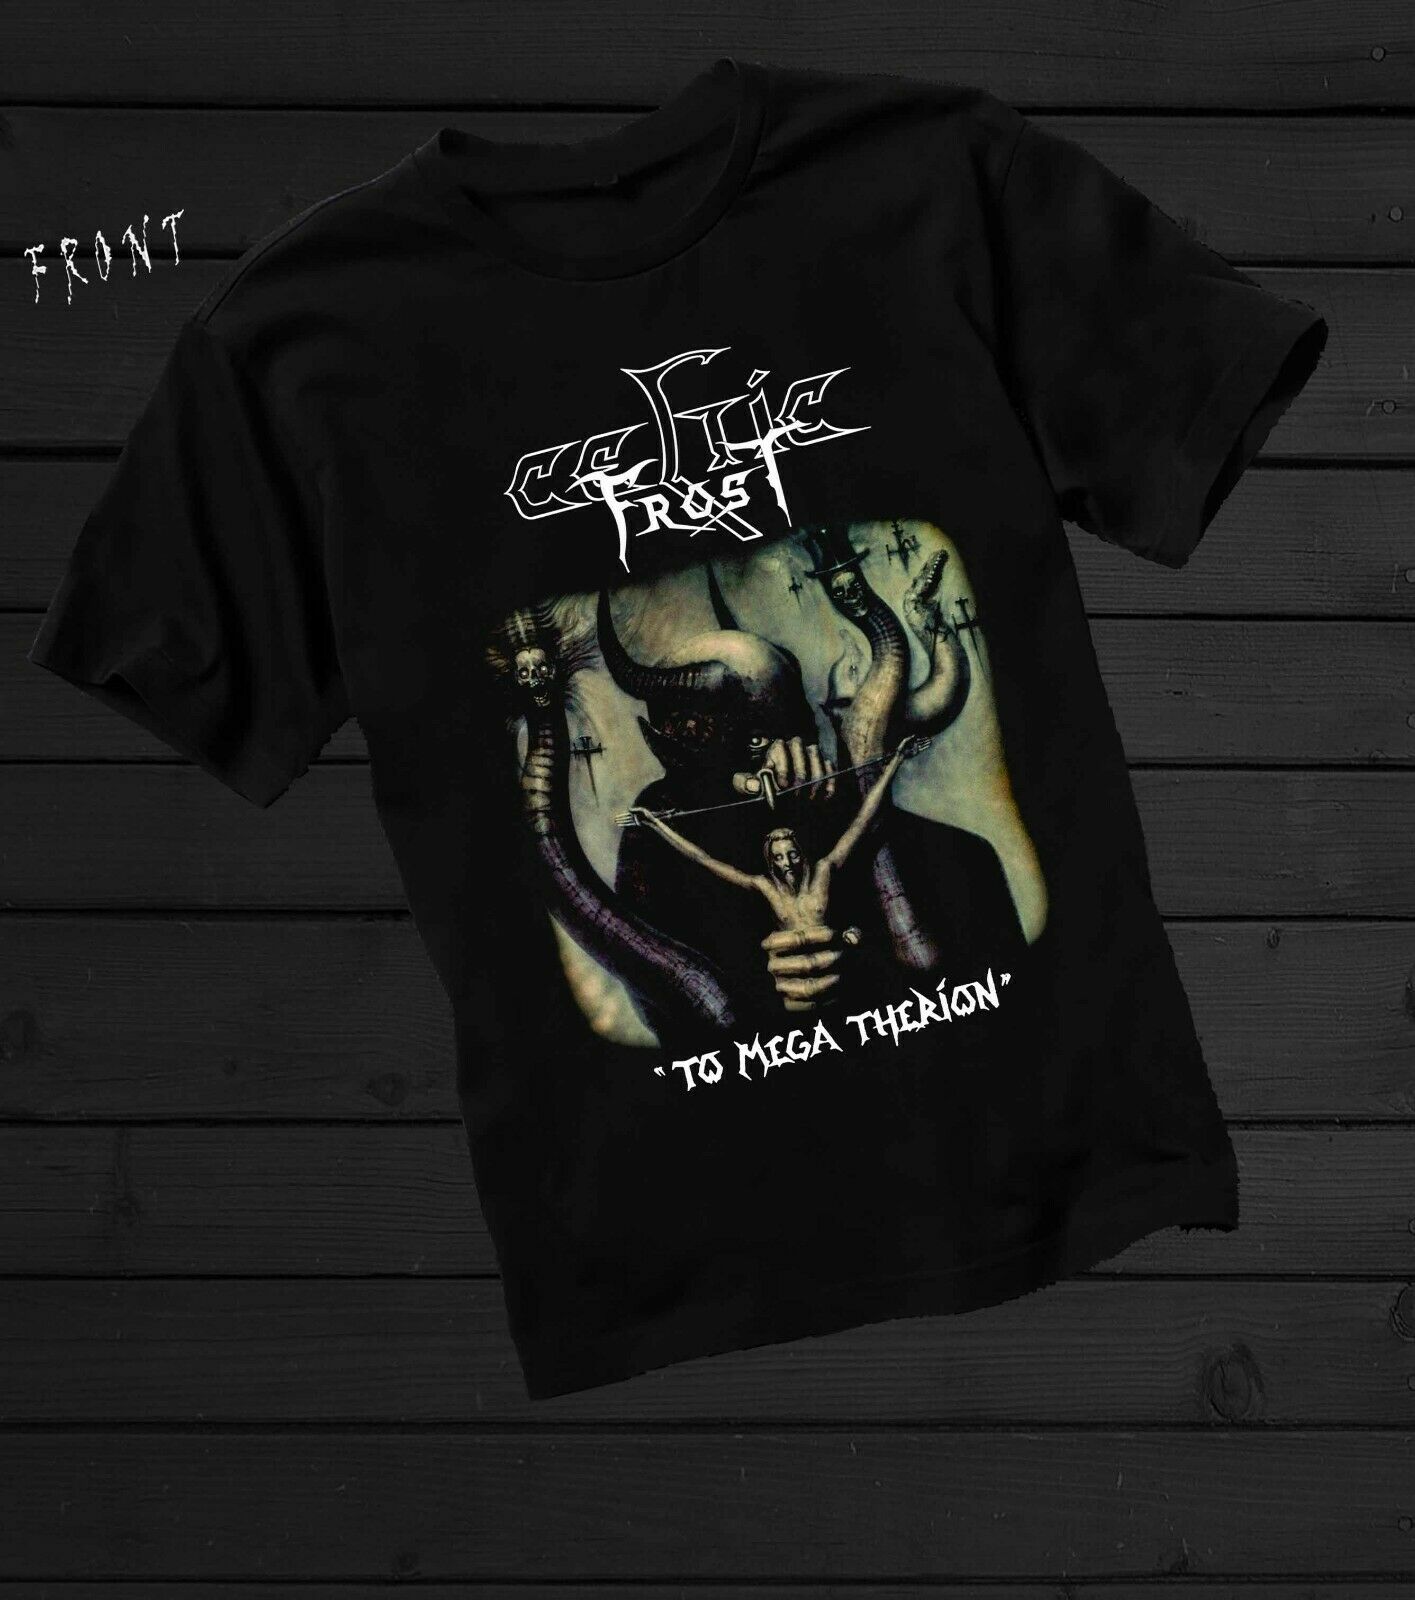 CELTIC FROST - To Mega Therion - Swiss Extreme Metal Band T-Shirt